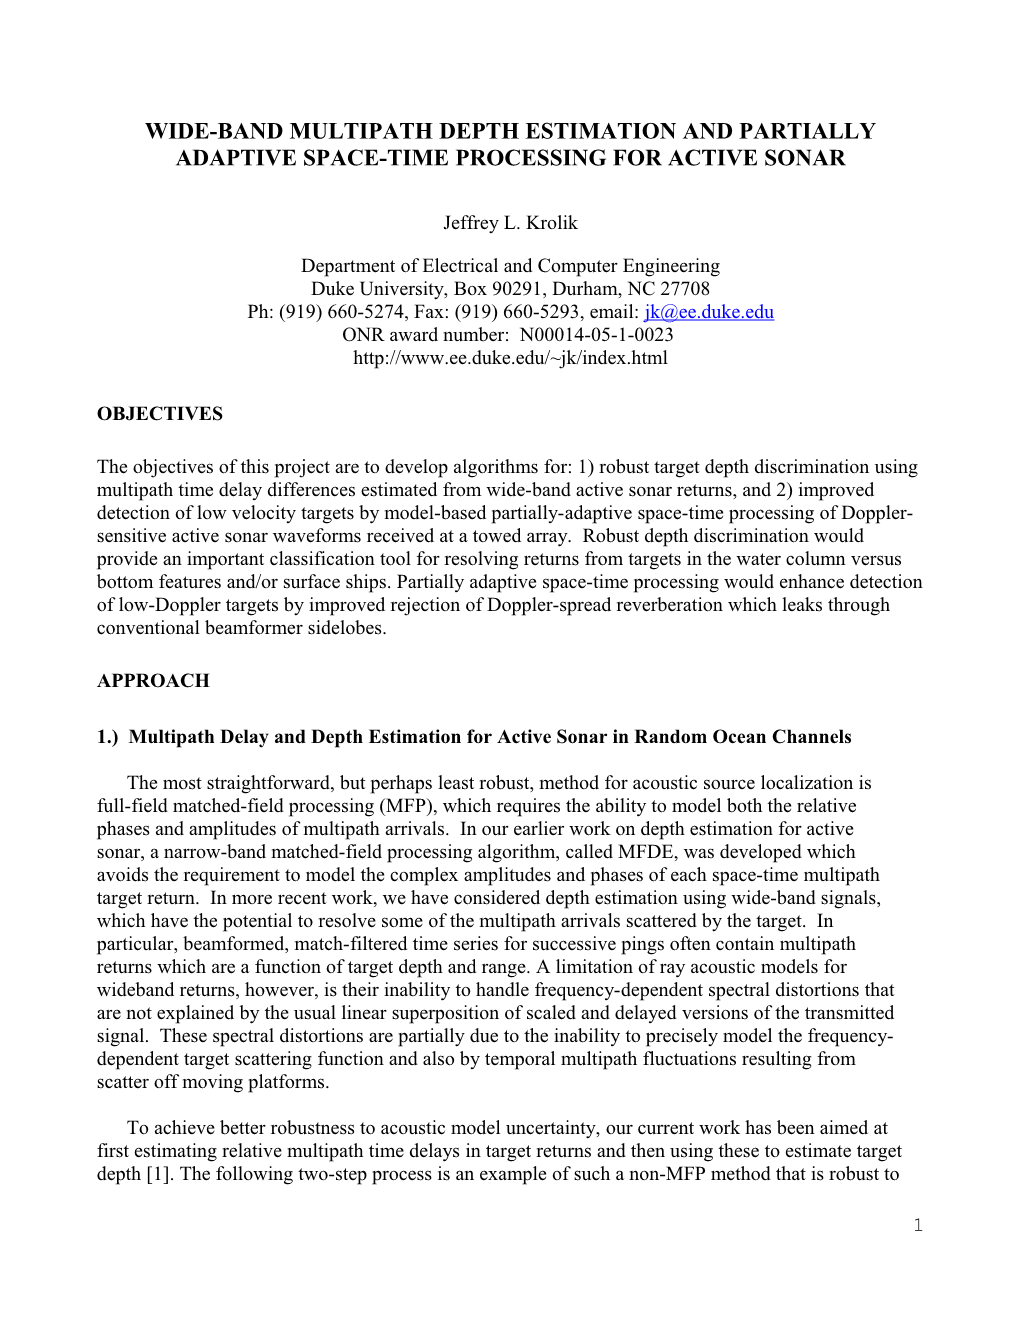 Wide-Band Multipath Depth Estimation and Partially Adaptive Space-Time Processing for Active